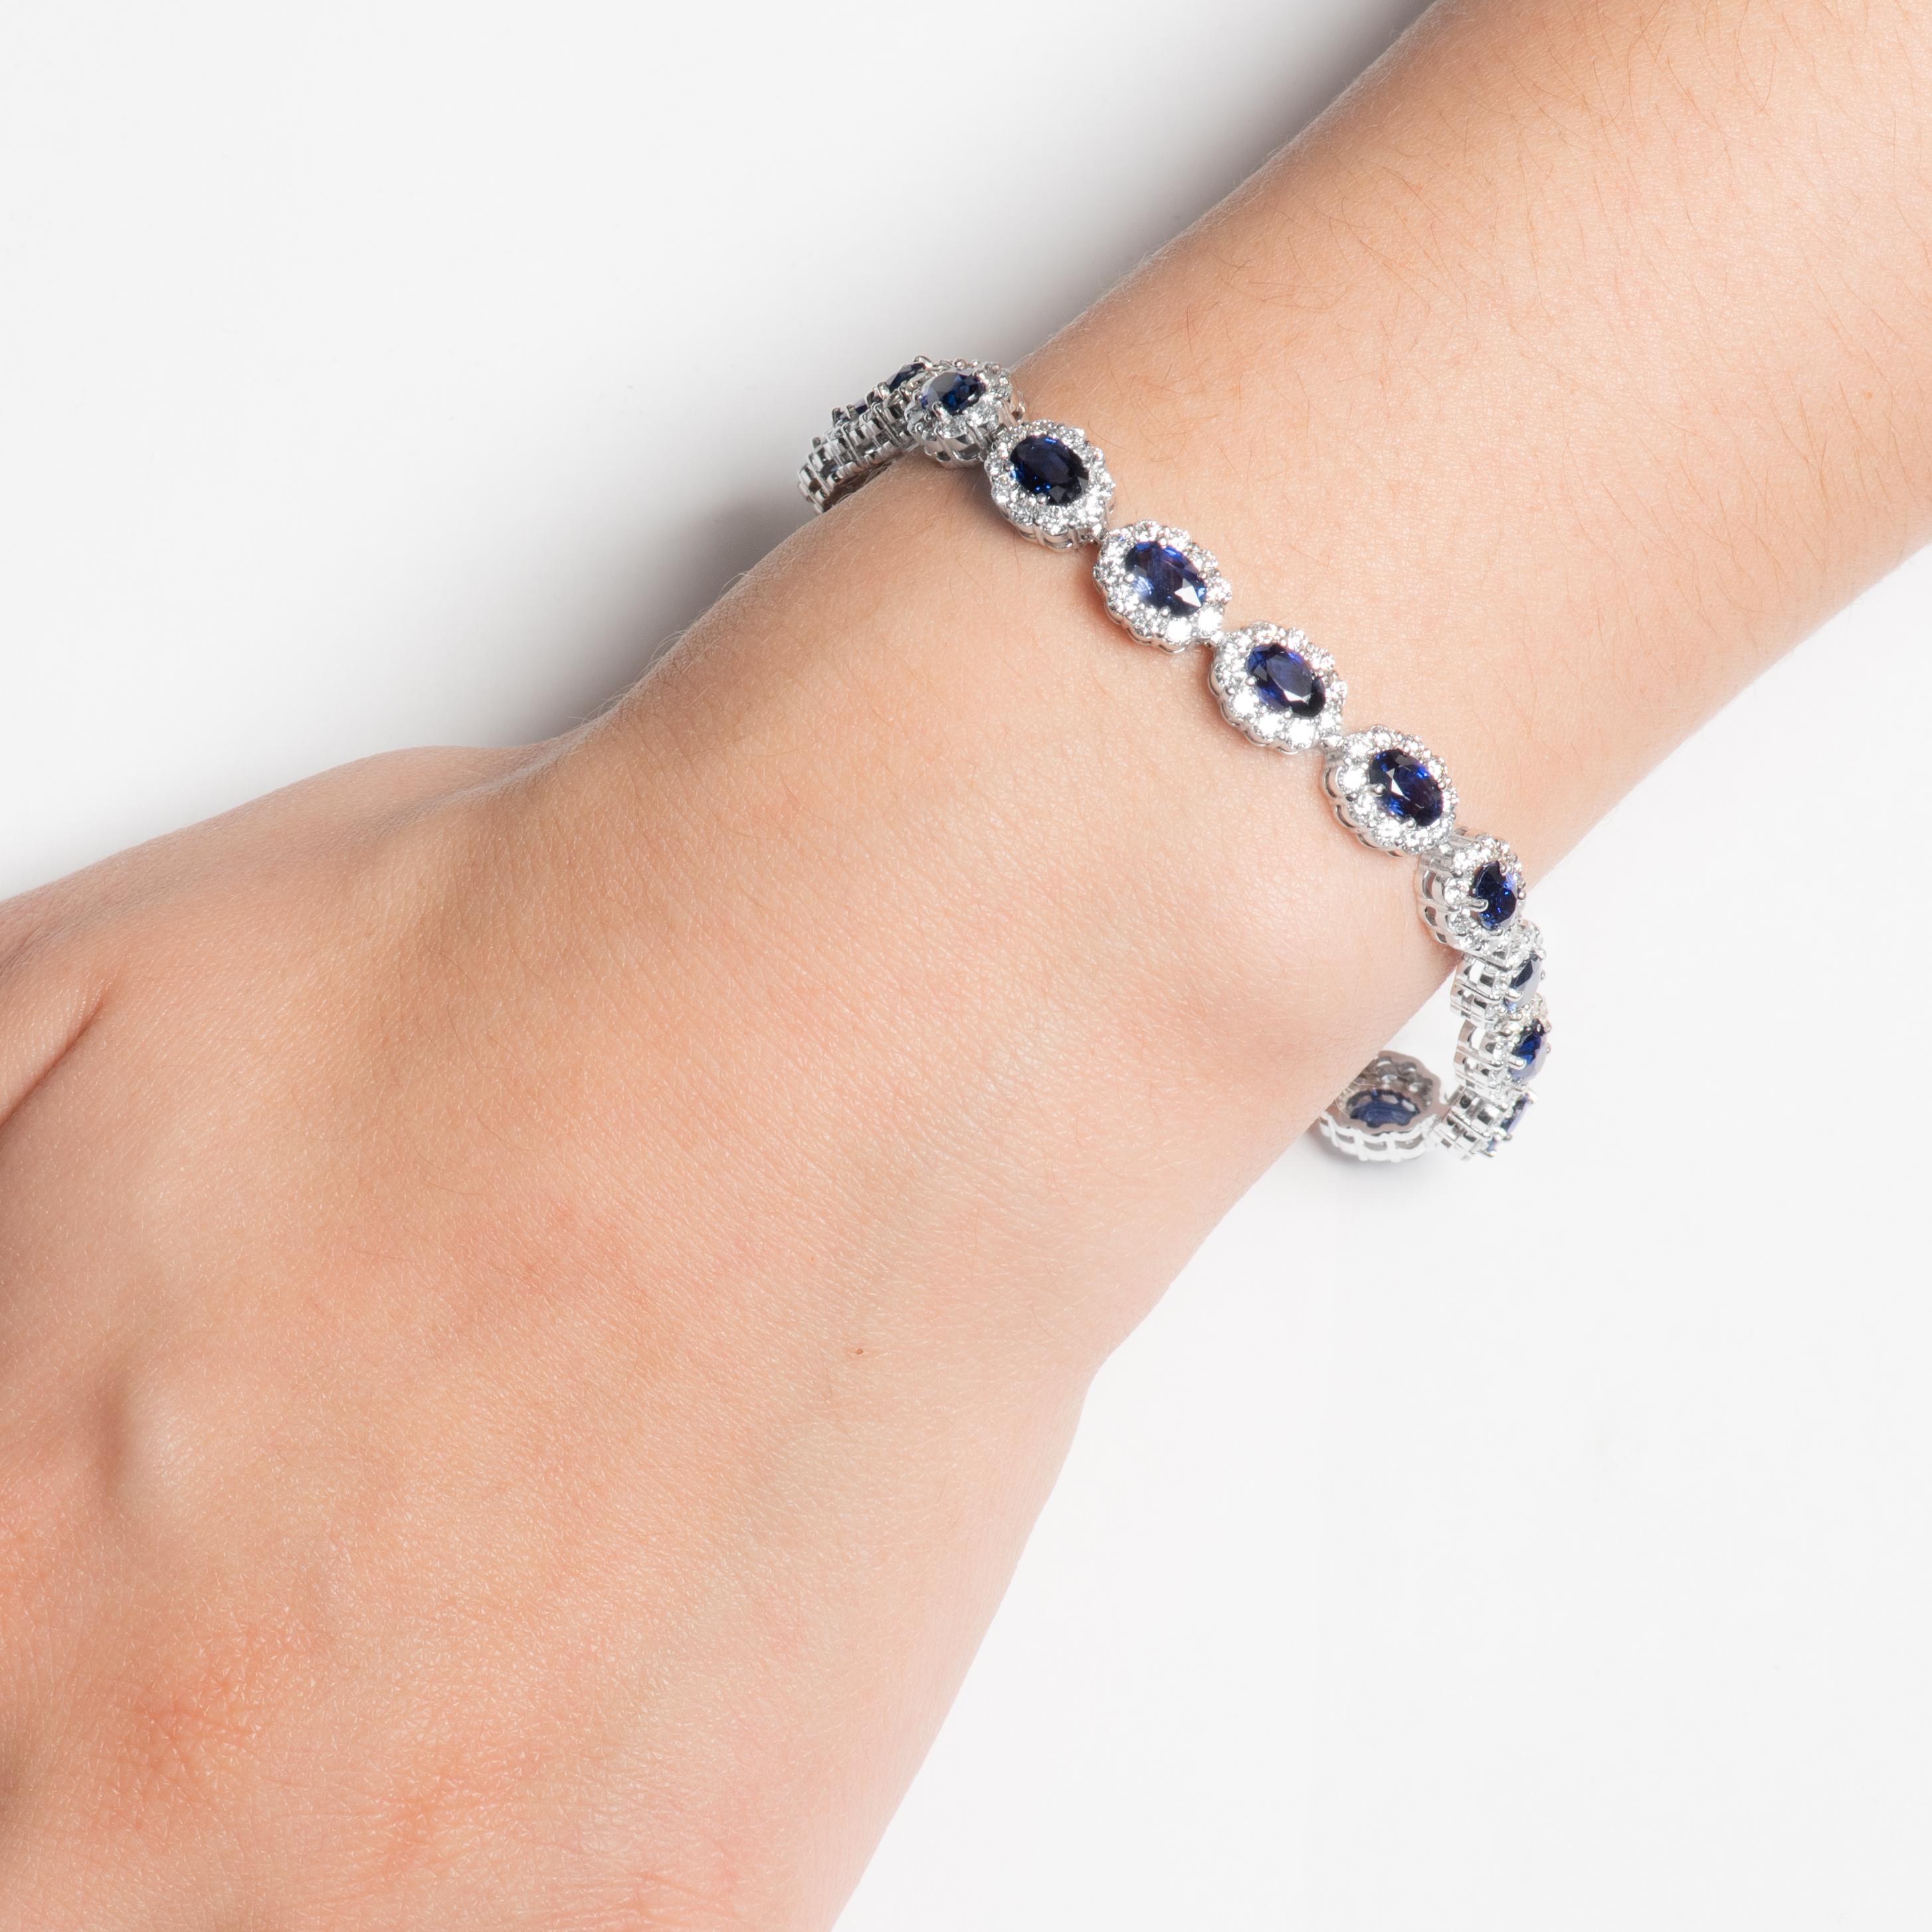 This beautiful bracelet features 6.67 carat total weight in oval cut natural blue sapphires accented by 2.70 carat total weight in round diamond halos set in 14 karat white gold. Box with safety clasp. 
Measurements: Length is 7